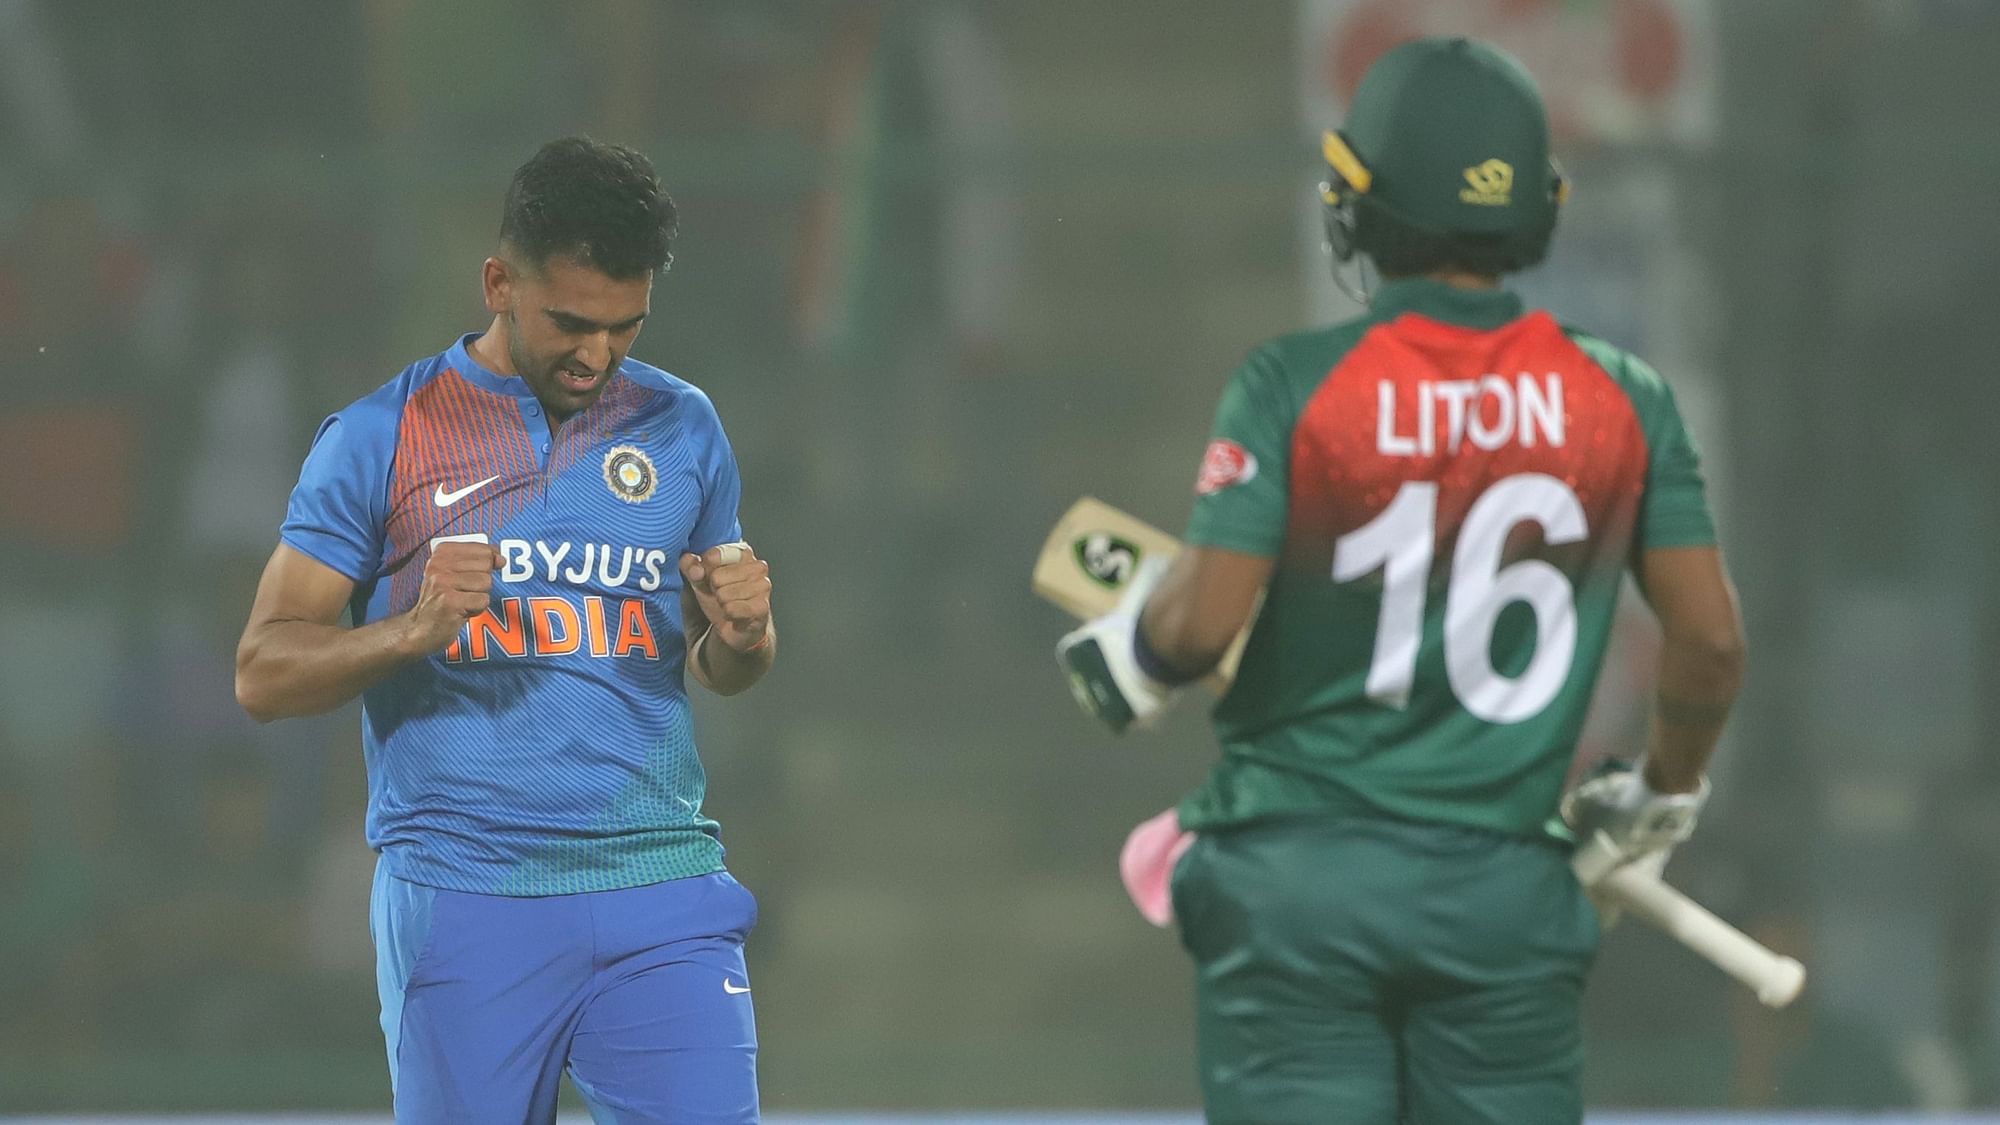 India vs Bangladesh T20 2019 Live Score Streaming on DD Sports, Hotstar and Star Sports: Bangladesh won the first T20I between the nations.